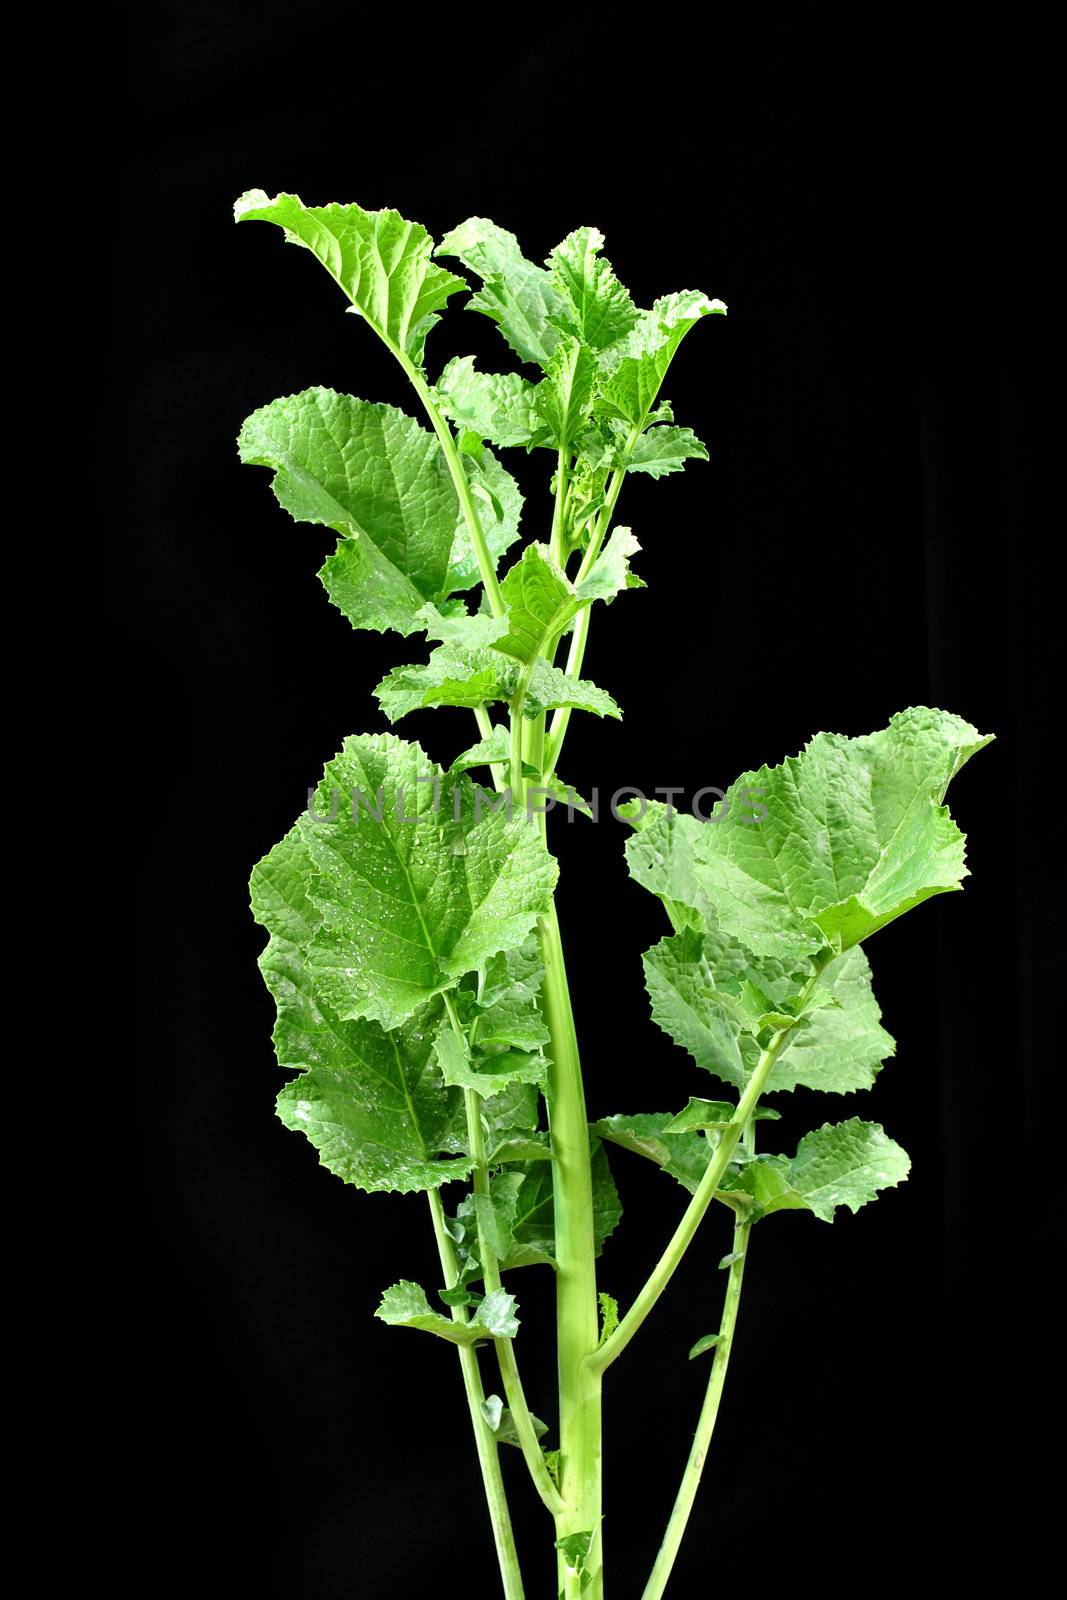 Top green leaves of mustard plant on black background